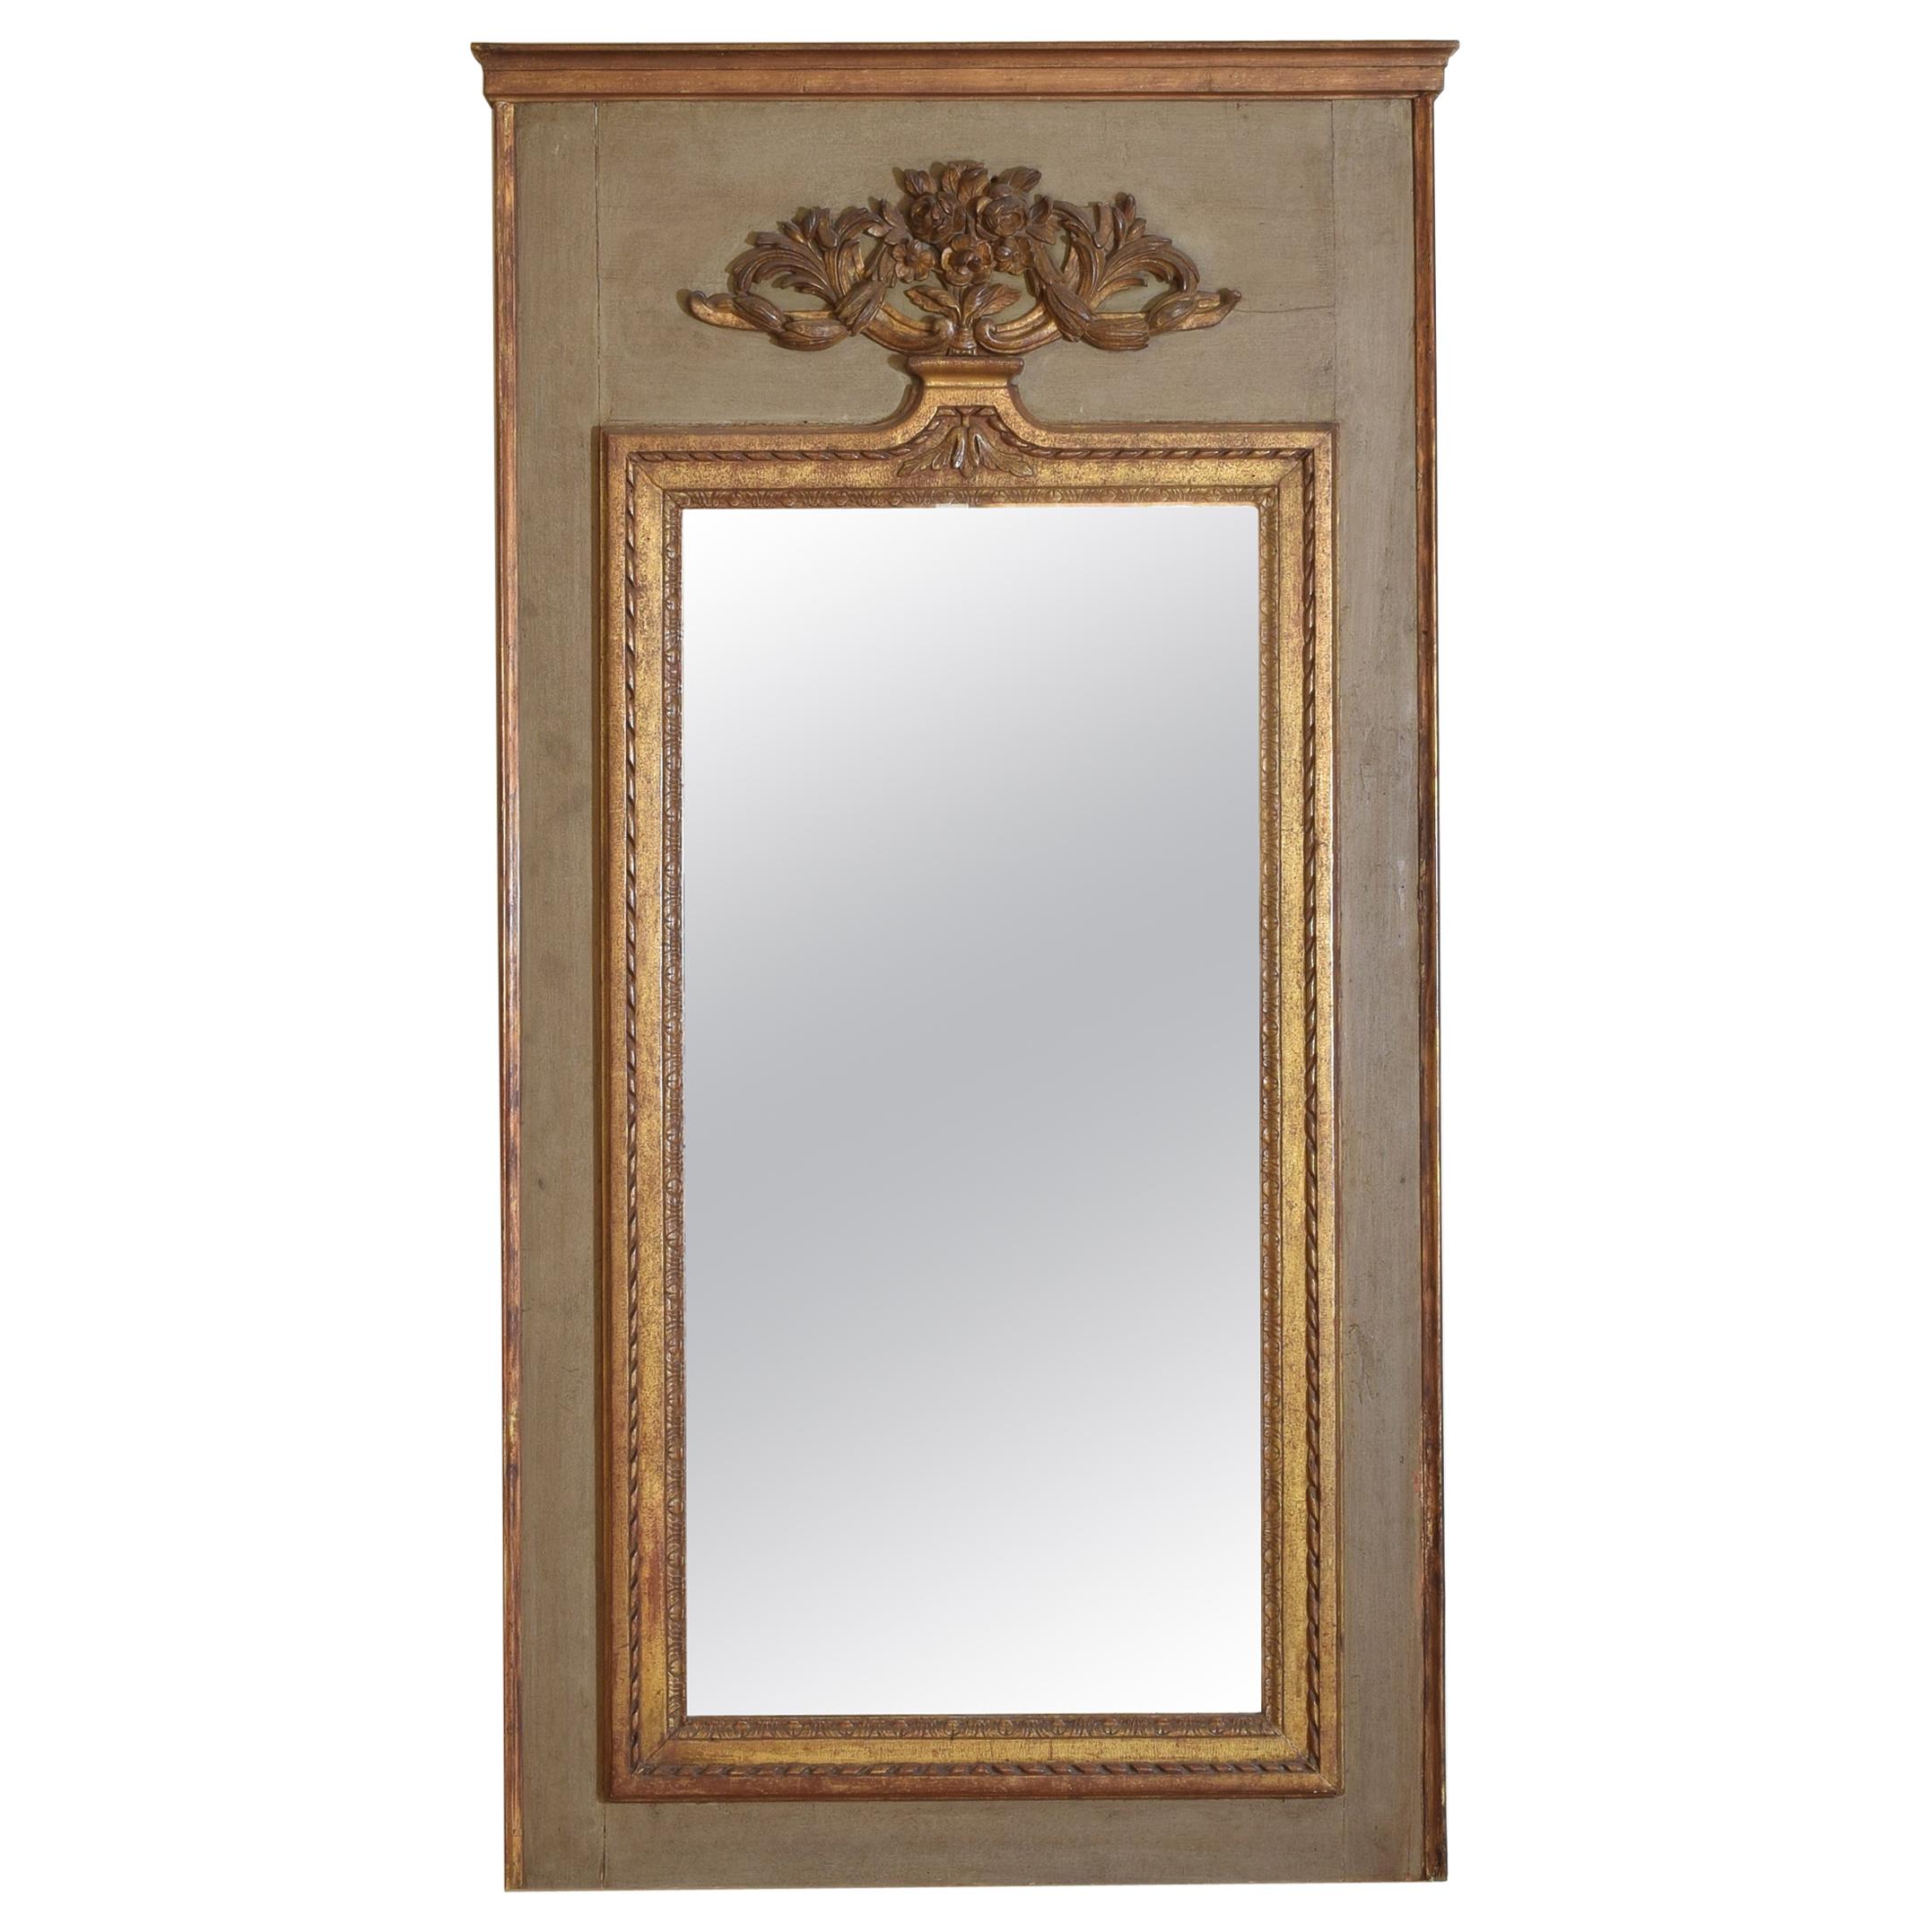 French Louis XVI Period Painted and Carved Giltwood Mirror, Late 18th Century